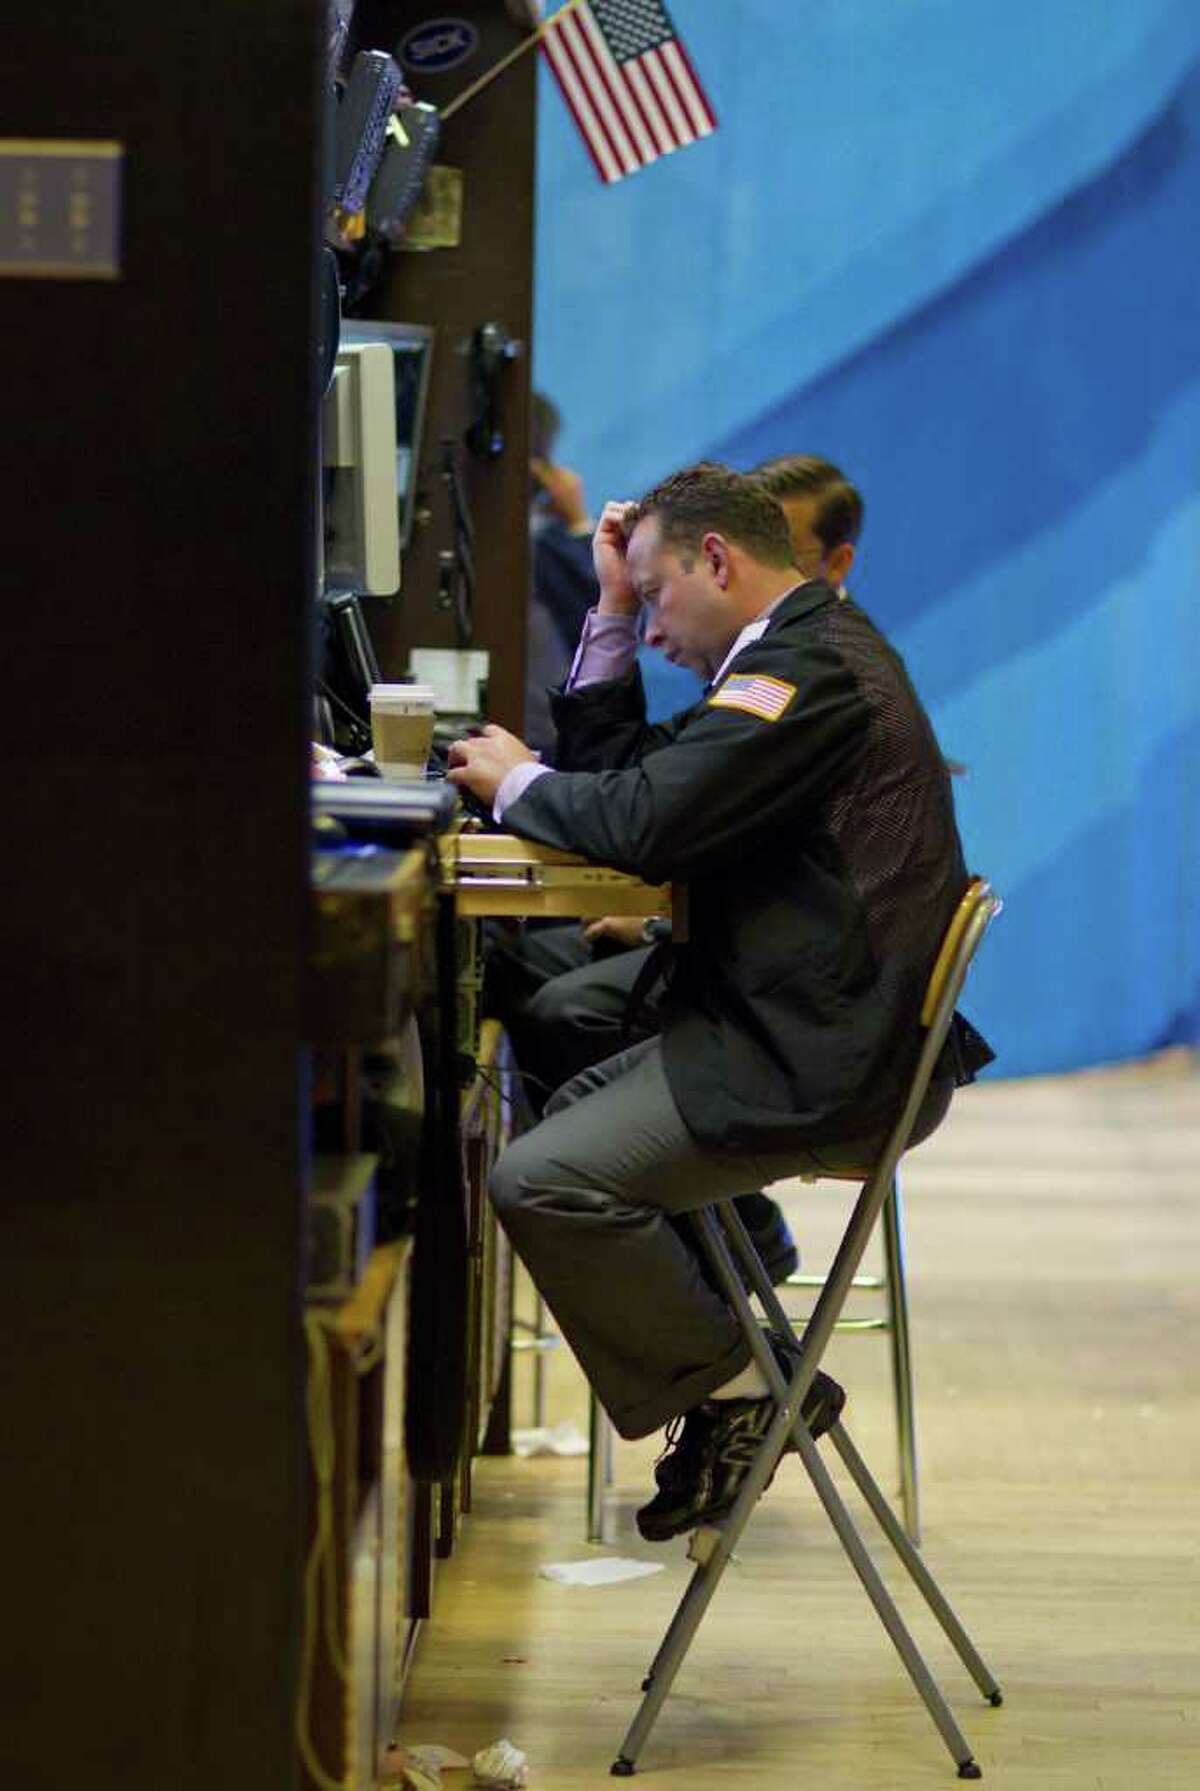 A trader works on the floor of the New York Stock Exchange on Thursday, Aug. 4, 2011 in New York.